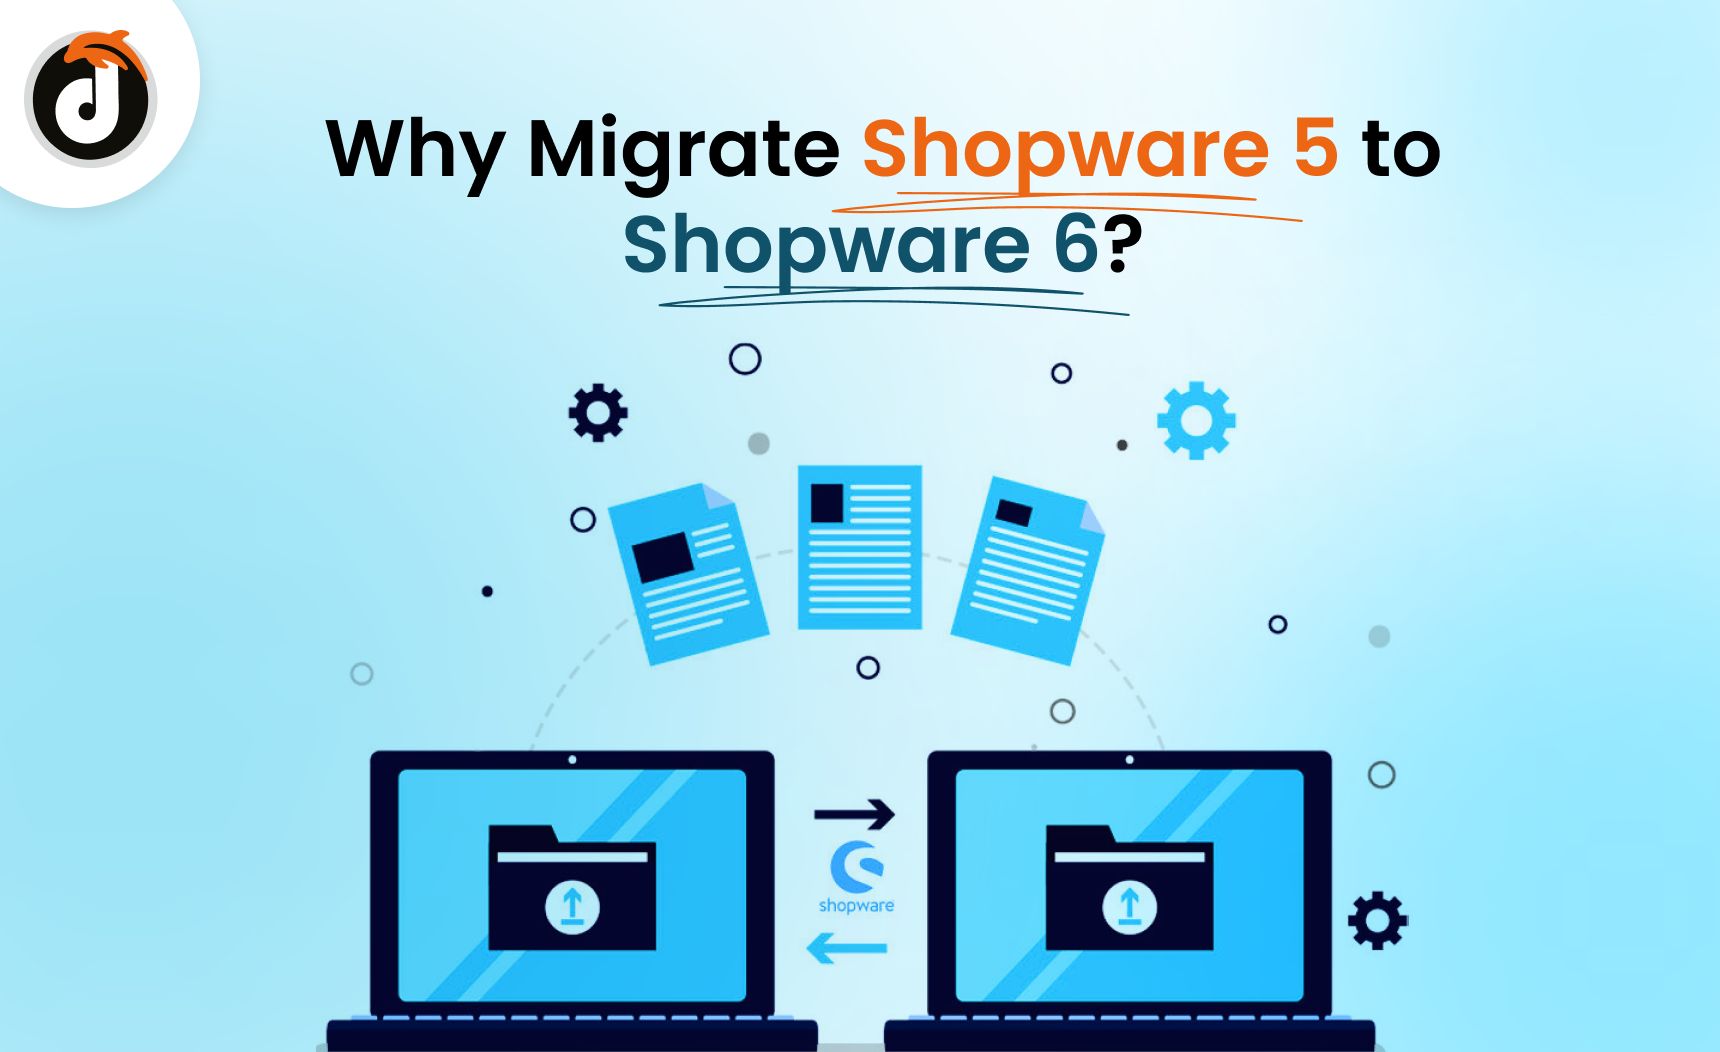 Why is Shopware 6 Required